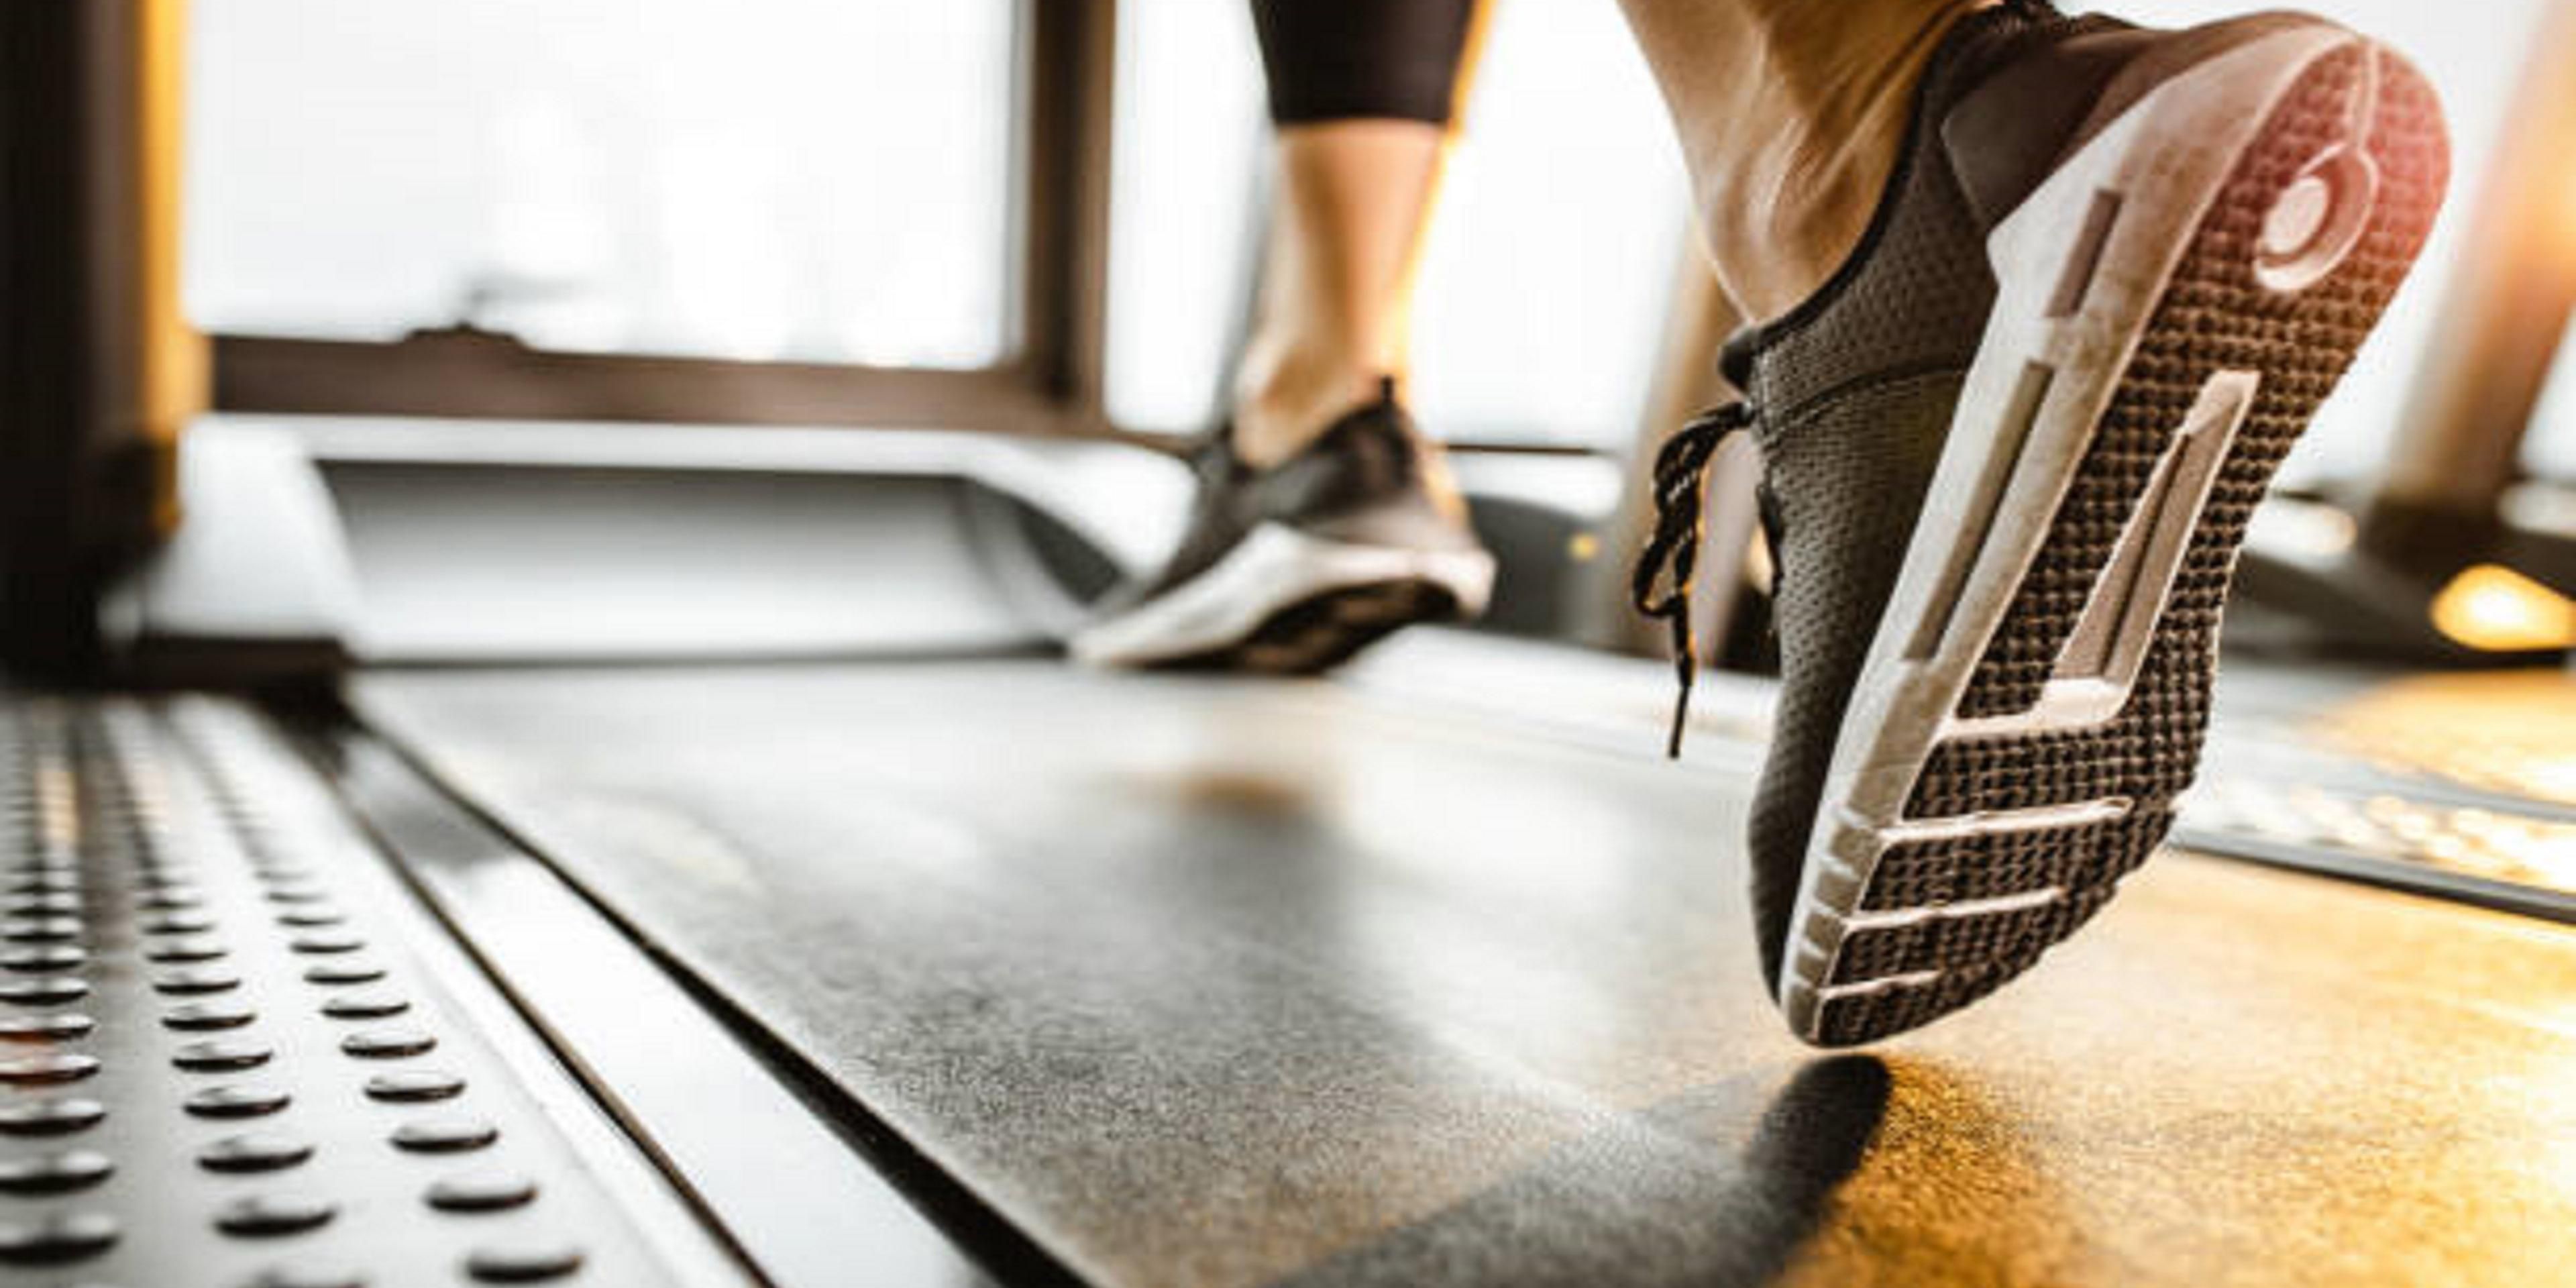 Get your sweat on in our complimentary, fully equipped Fitness Center with a treadmill and free weights. Open 24 hours a day.